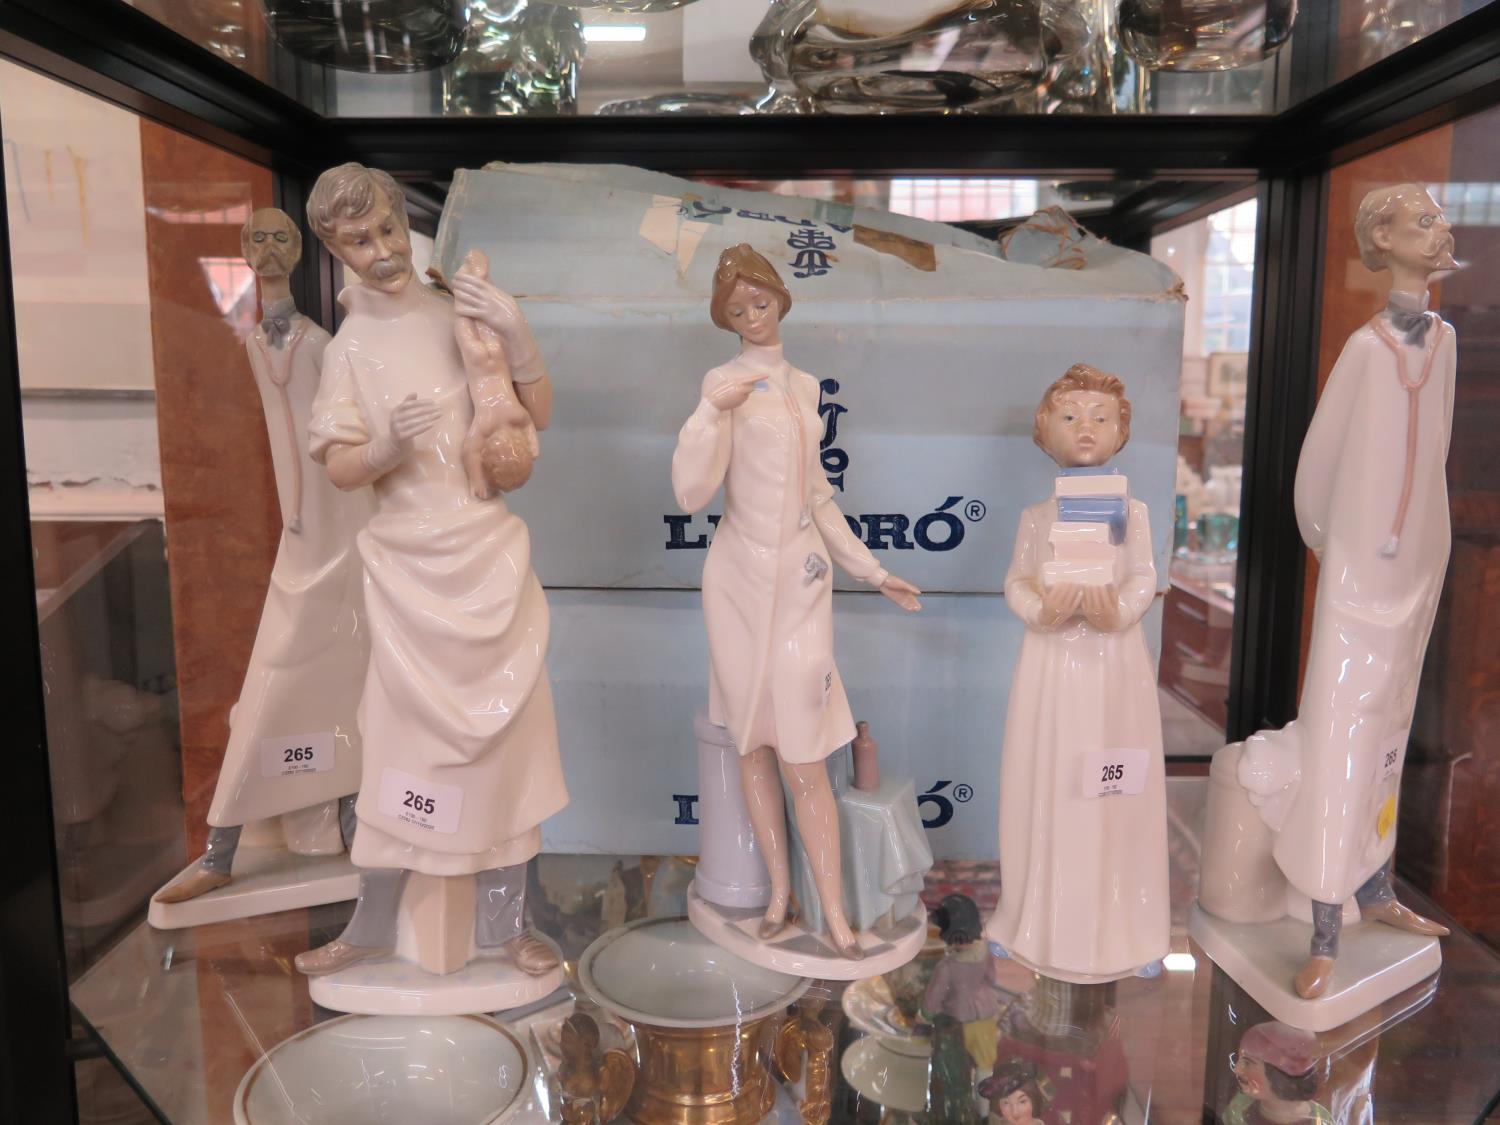 Two Lladro figures of a doctor, 36 cm high, another of an obstetrician, 36 cm high (with box),